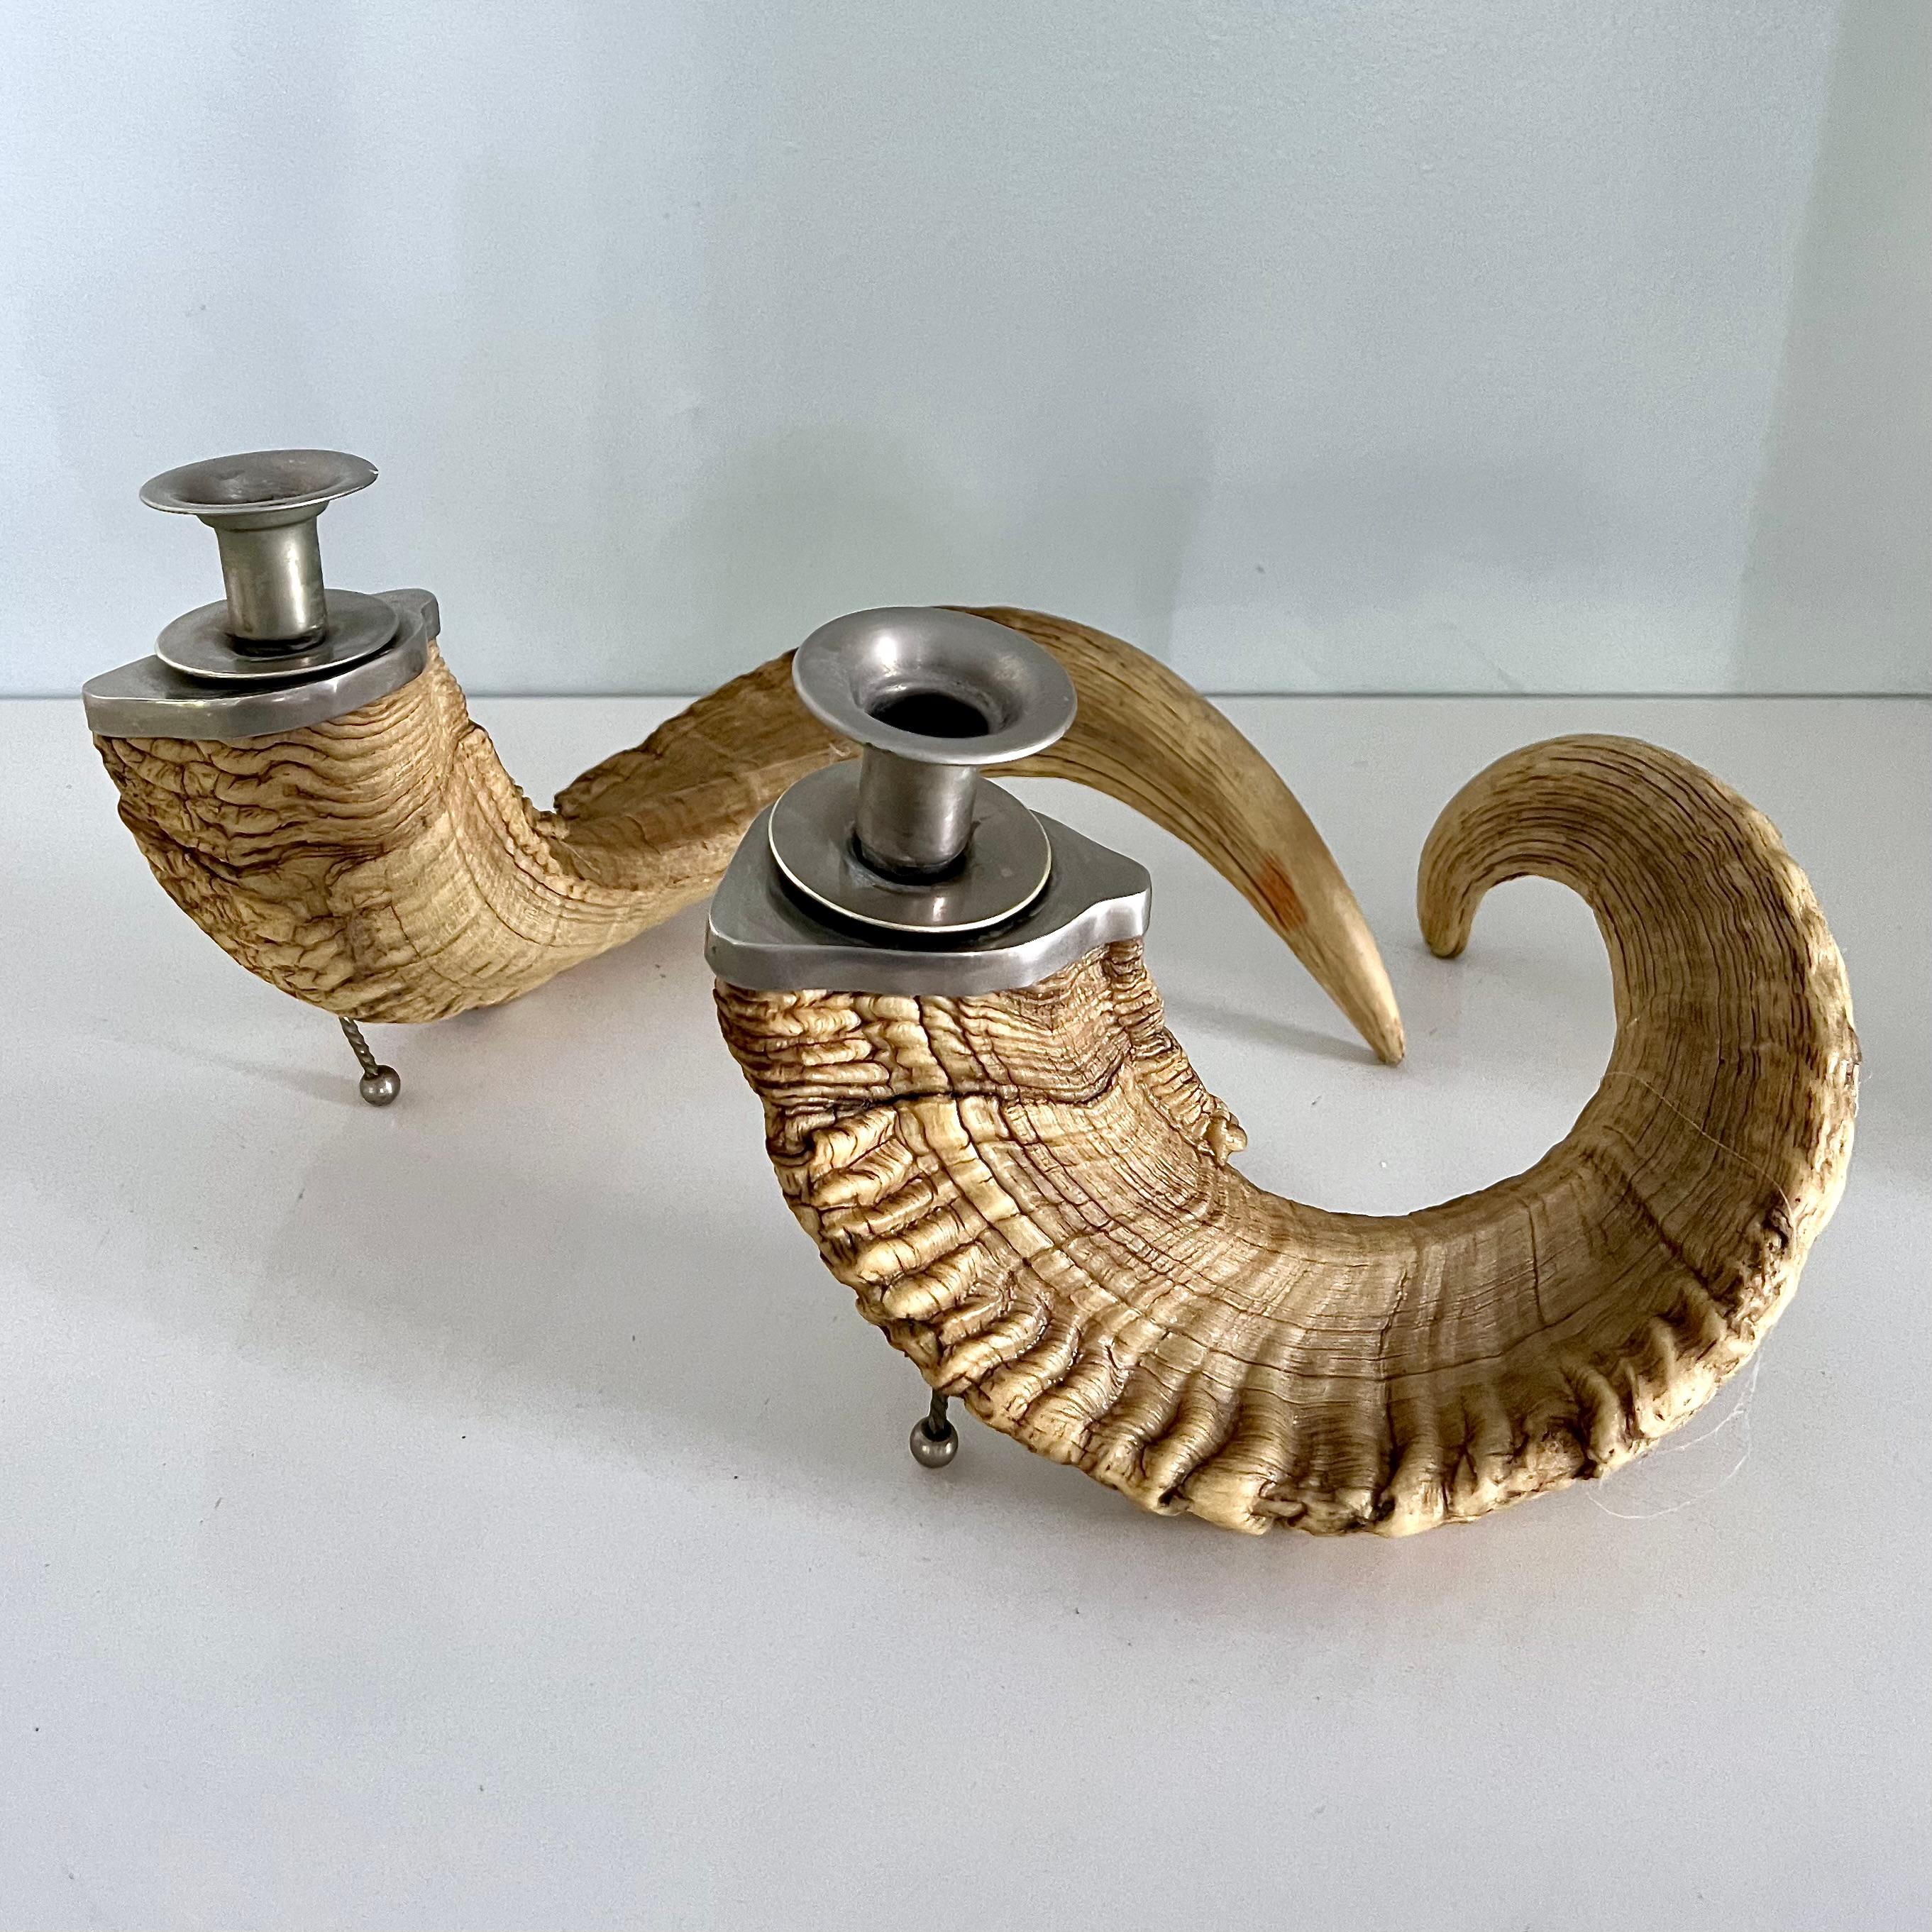 This pair of ram horn candlestick holders is in very good condition. 

 A fun and creative set. A natural compliment to sport rooms and cabins. Perhaps your 